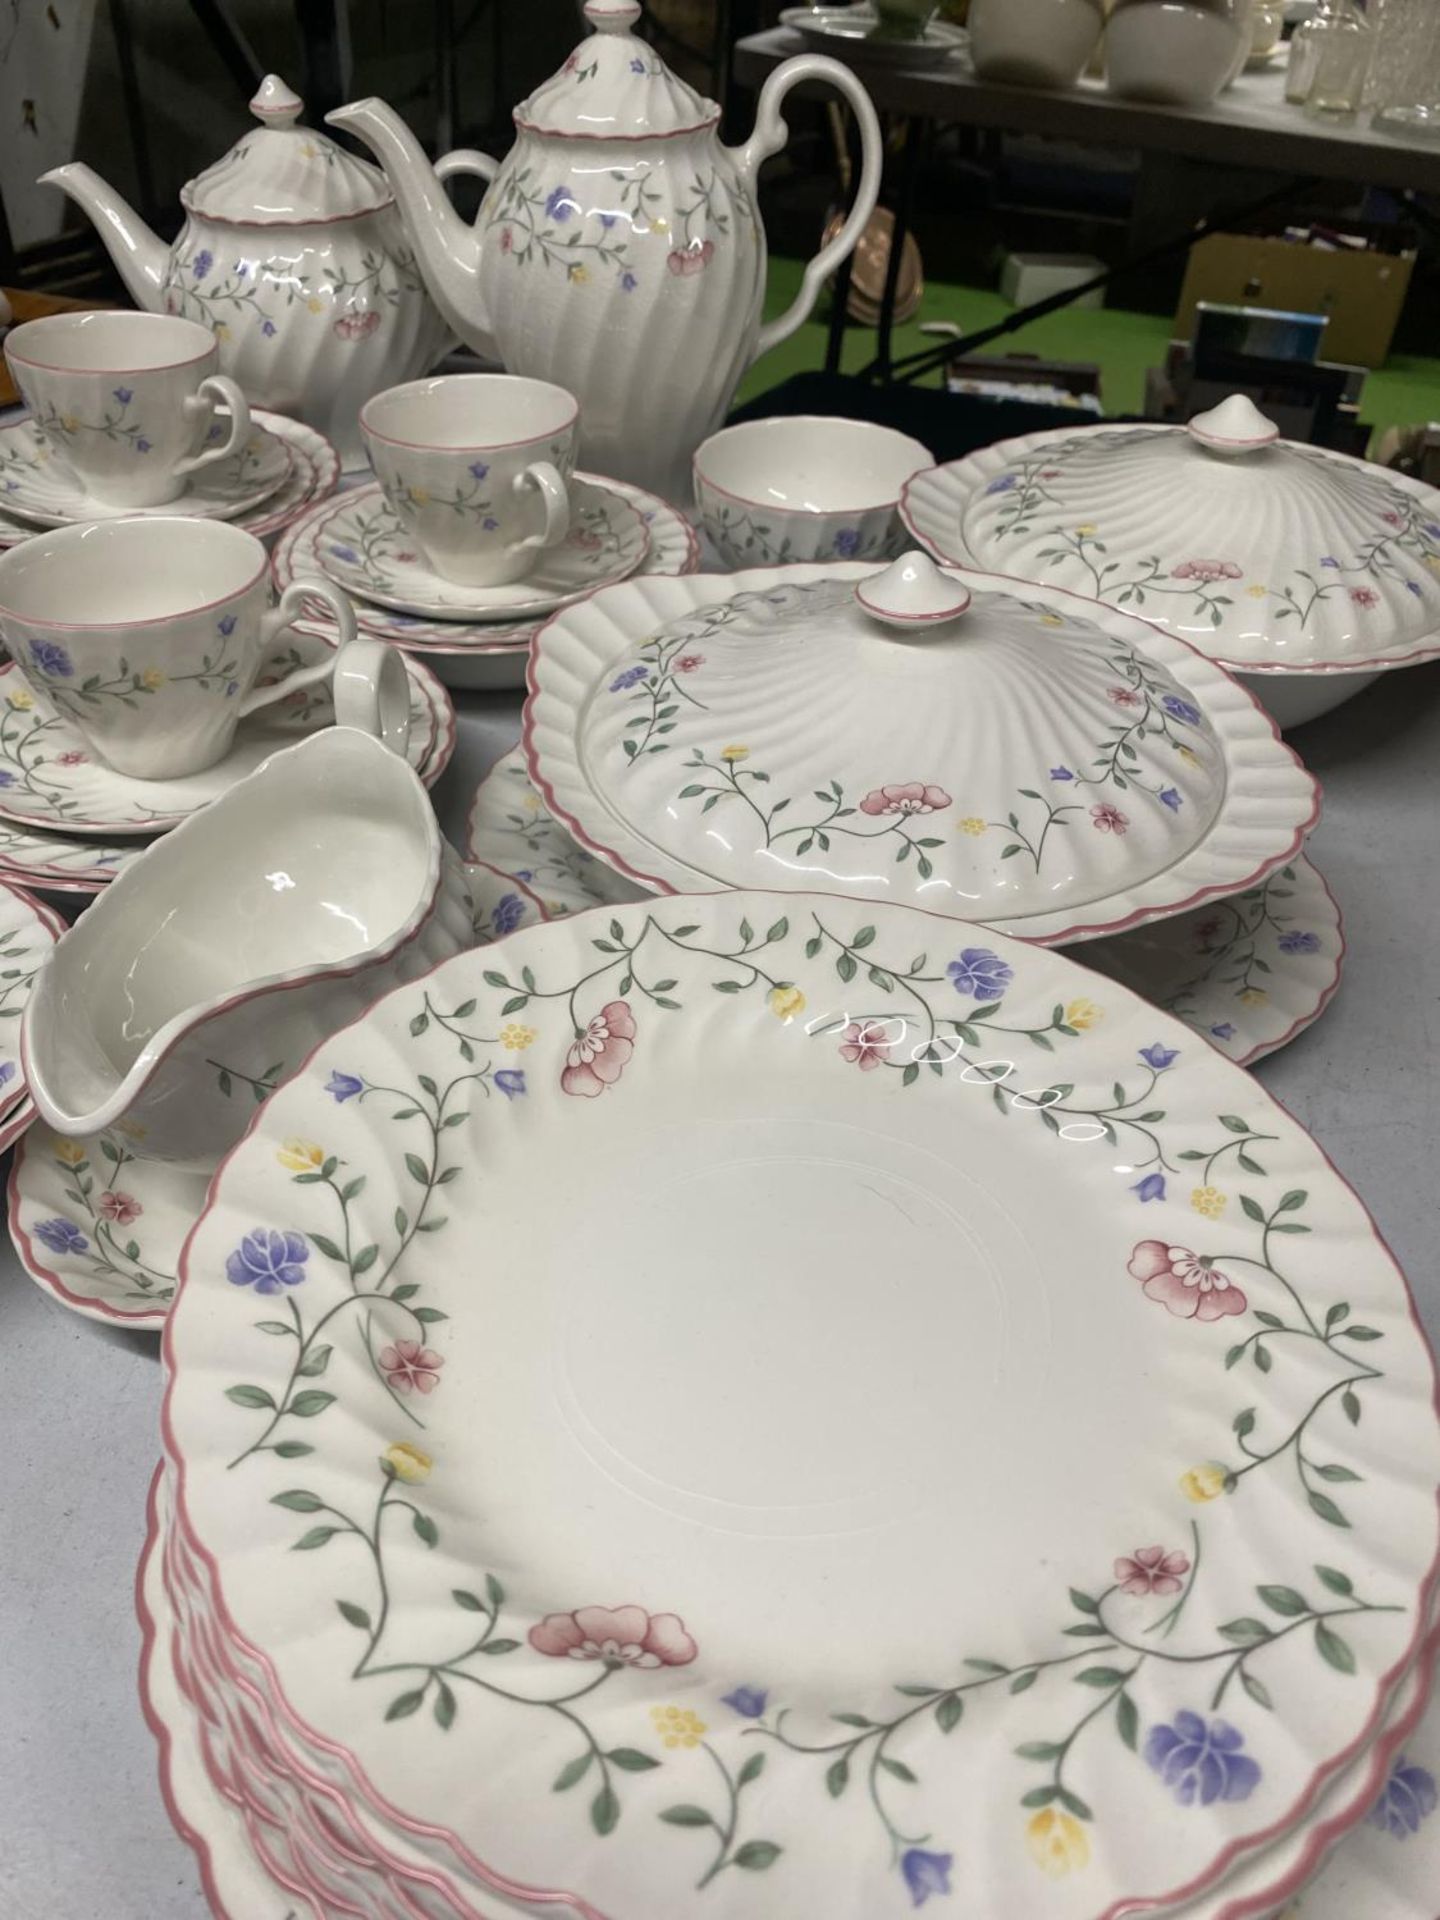 A NEAR COMPLETE JOHNSON BROS DINNER SERVICE INCLUDING DINNER AND SIDE PLATES, CUPS AND SAUCERS, - Image 3 of 4